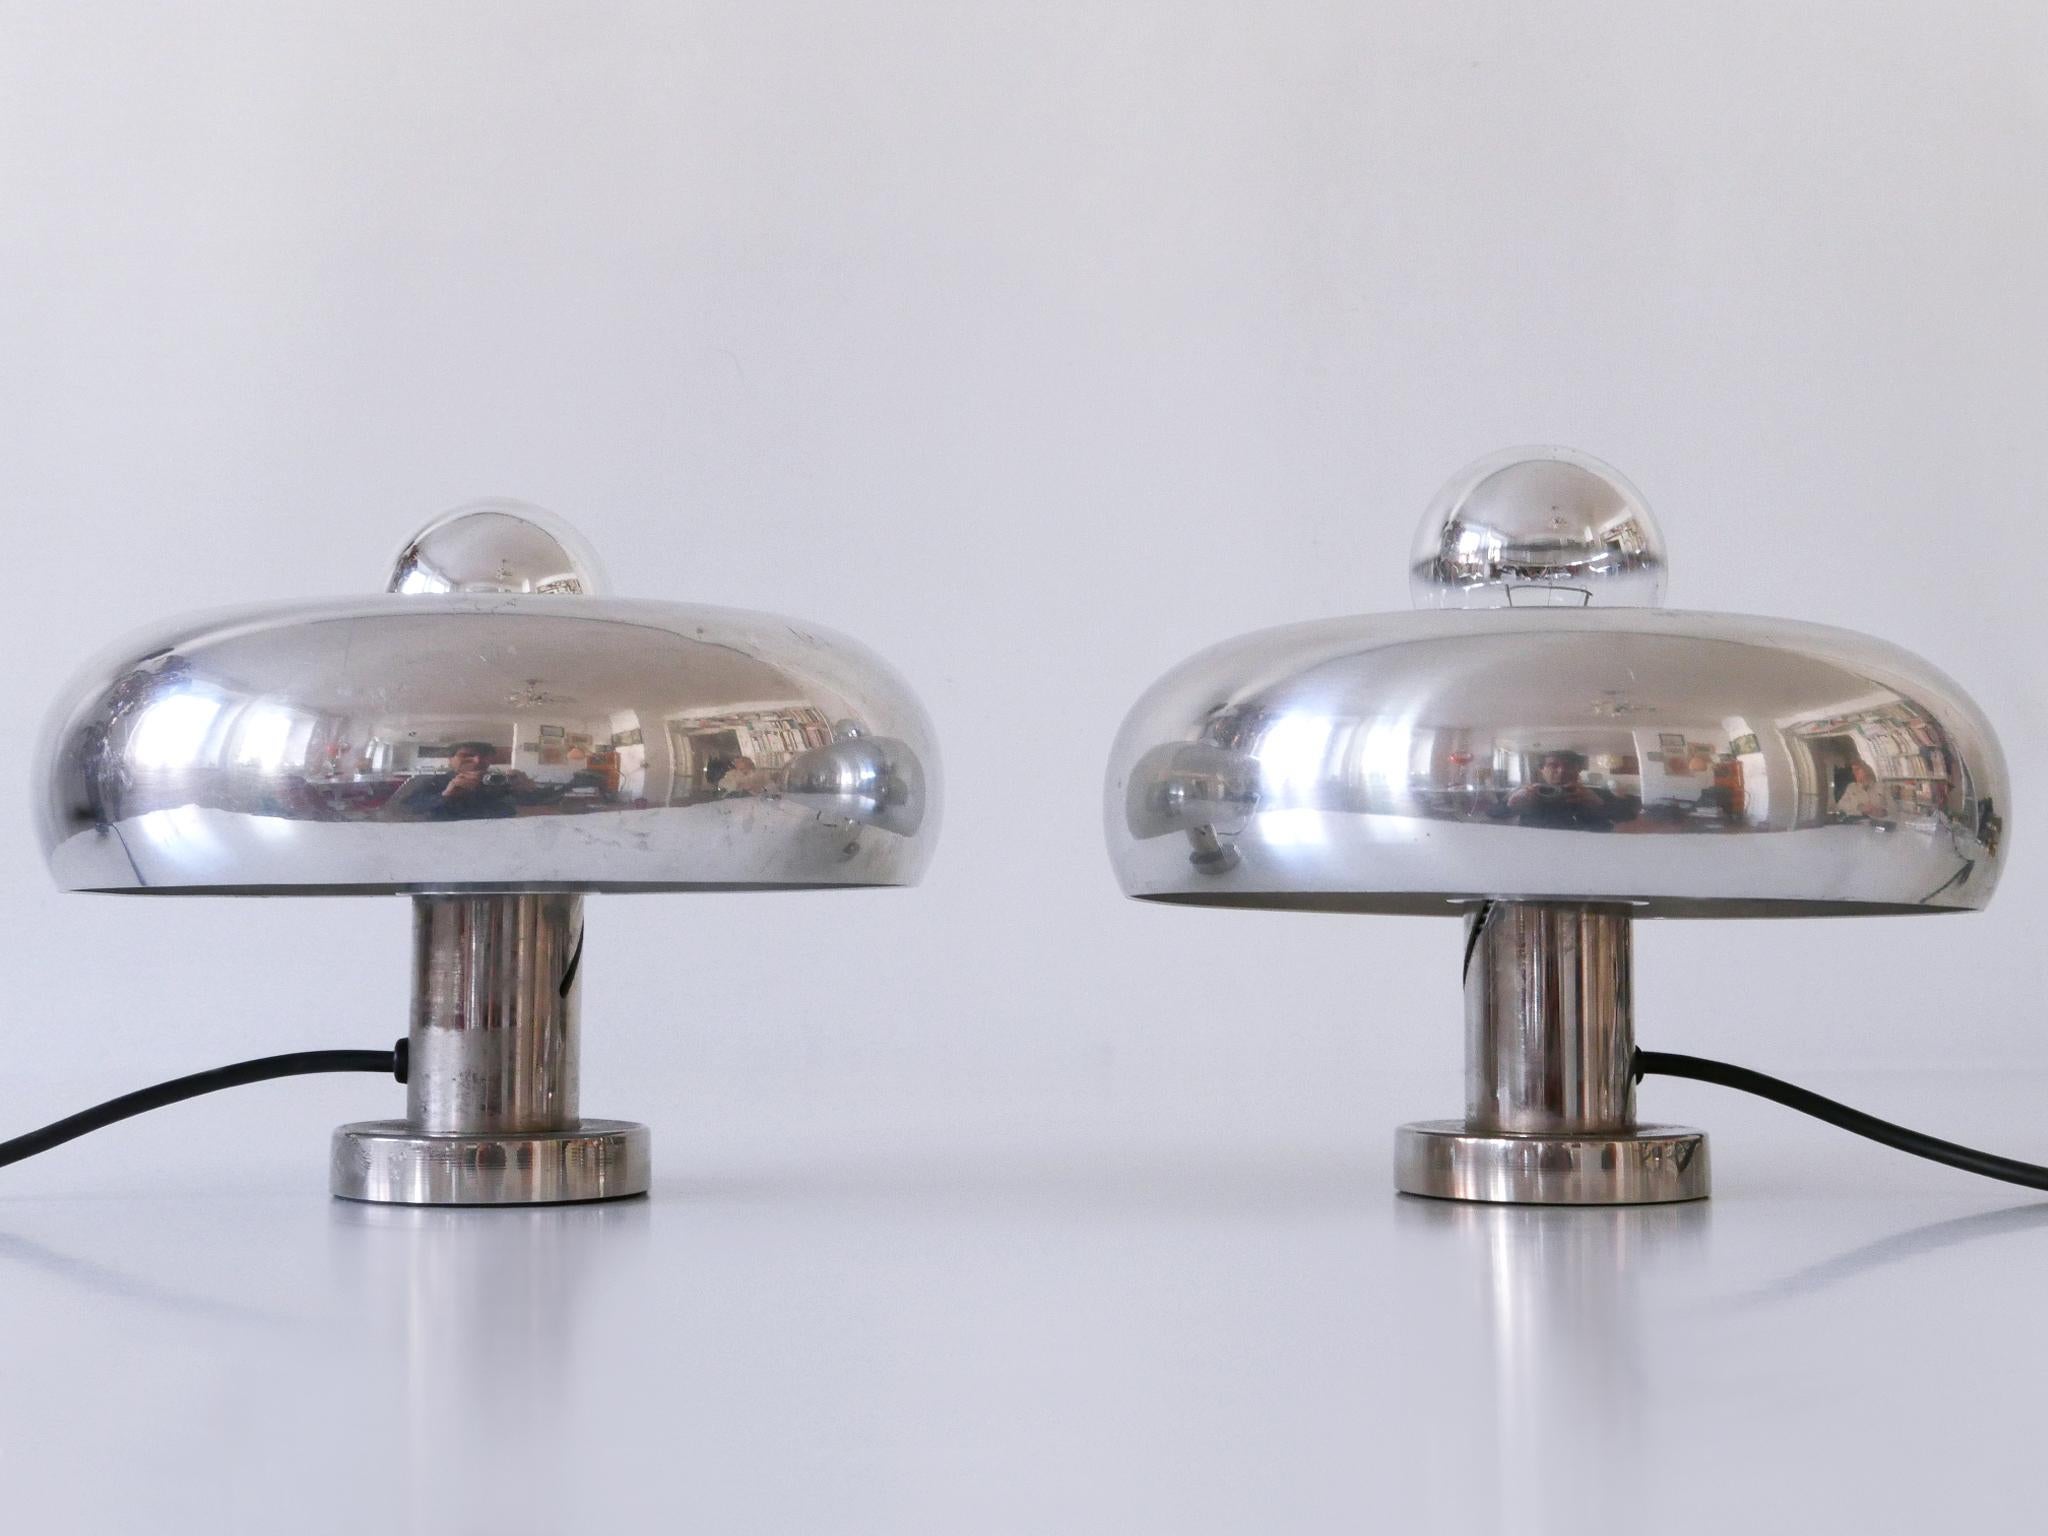 Set of Two Table Lamps or Sconces Pox by Ingo Maurer for Design M Germany, 1960s For Sale 2